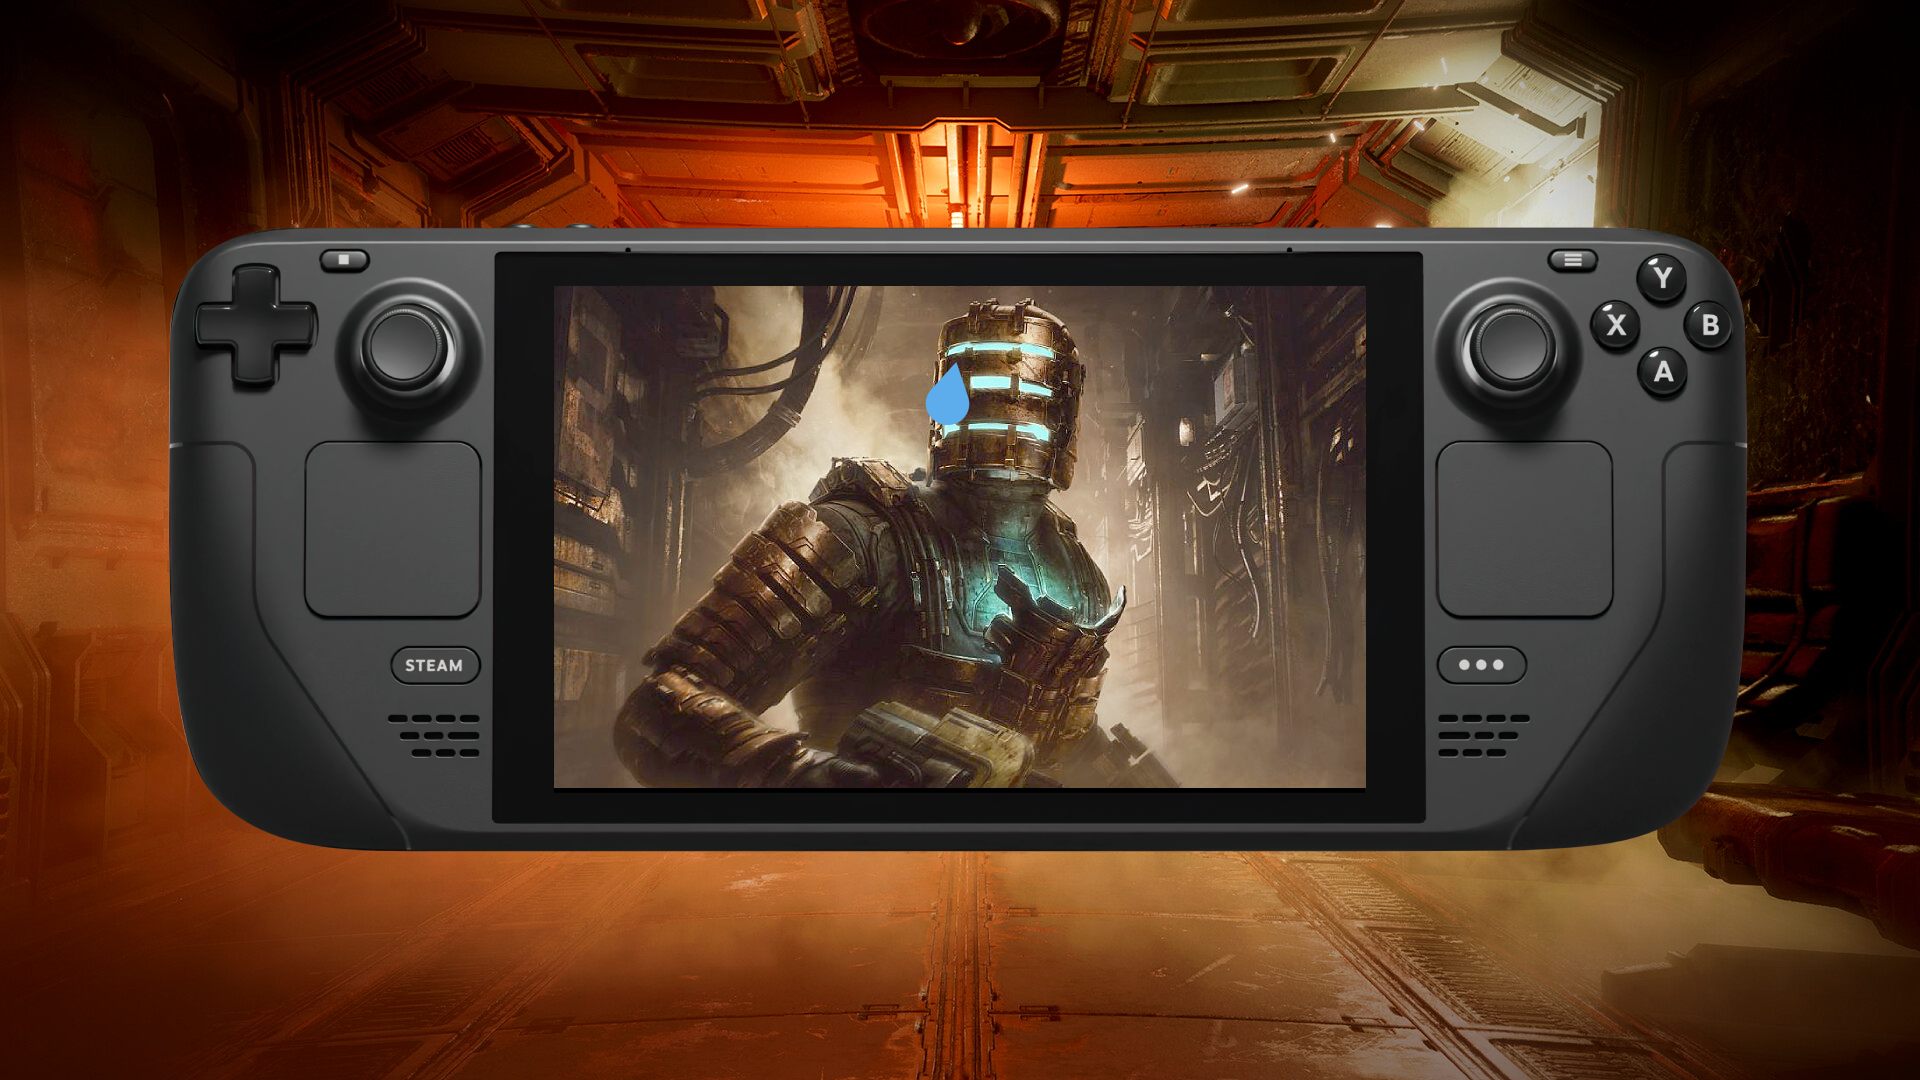 Steam Deck fans are fearful about Dead Space compatibility